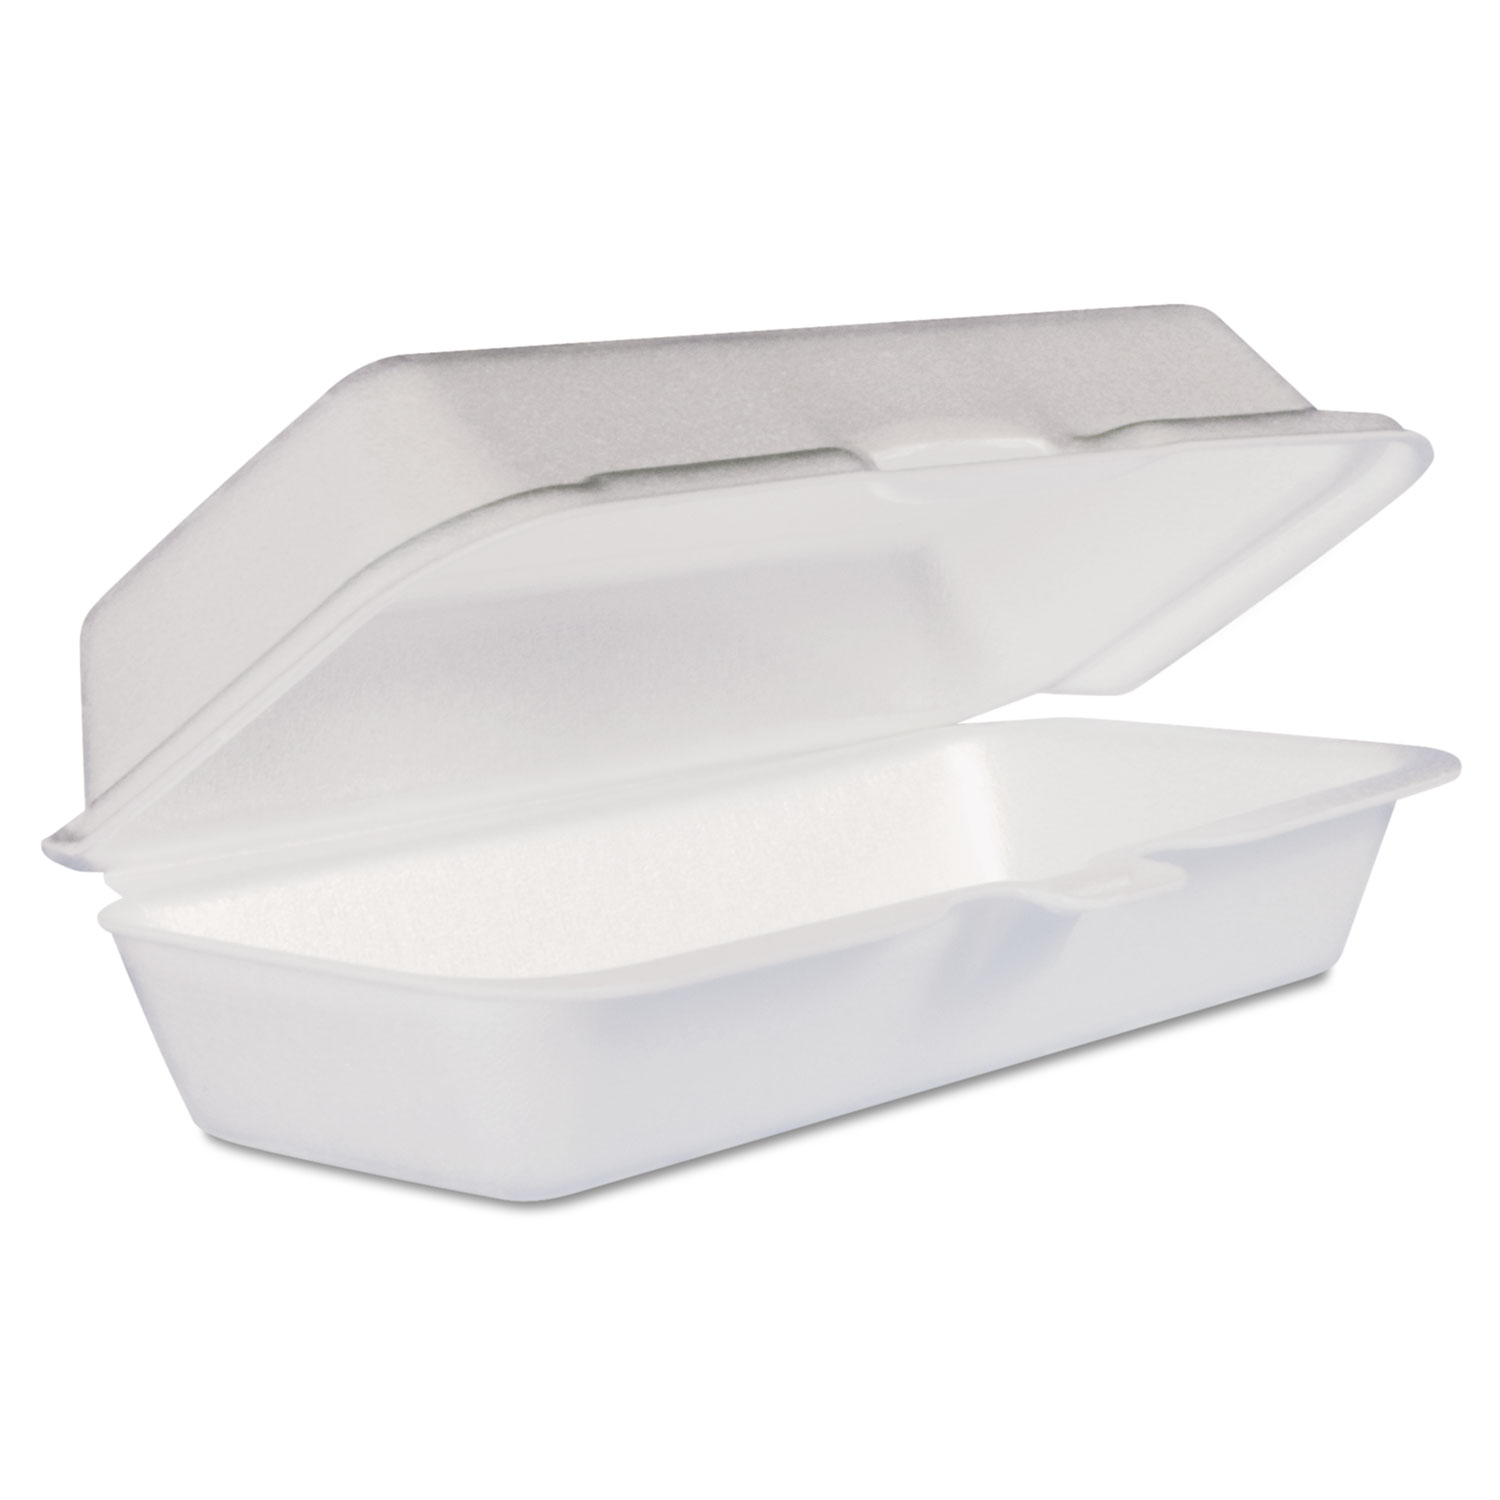  Dart 72HT1 Foam Hot Dog Container/Hinged Lid, 7-1/1 x3-4/5x2-3/10, White,125/Bag, 4 Bags/Ct (DCC72HT1) 